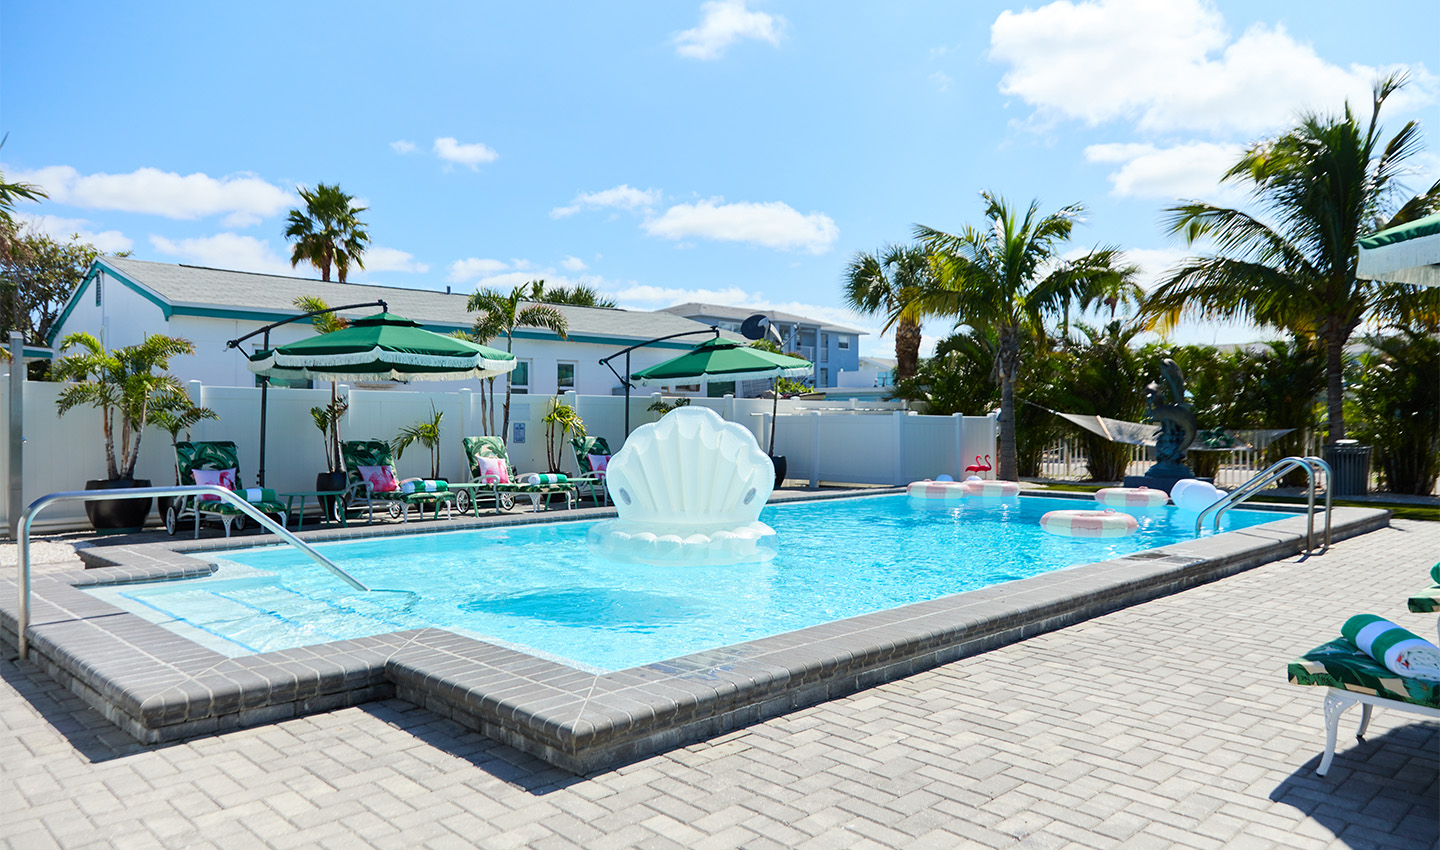 Enjoy The Florida Sun While You Relax By Our Outdoor Pool